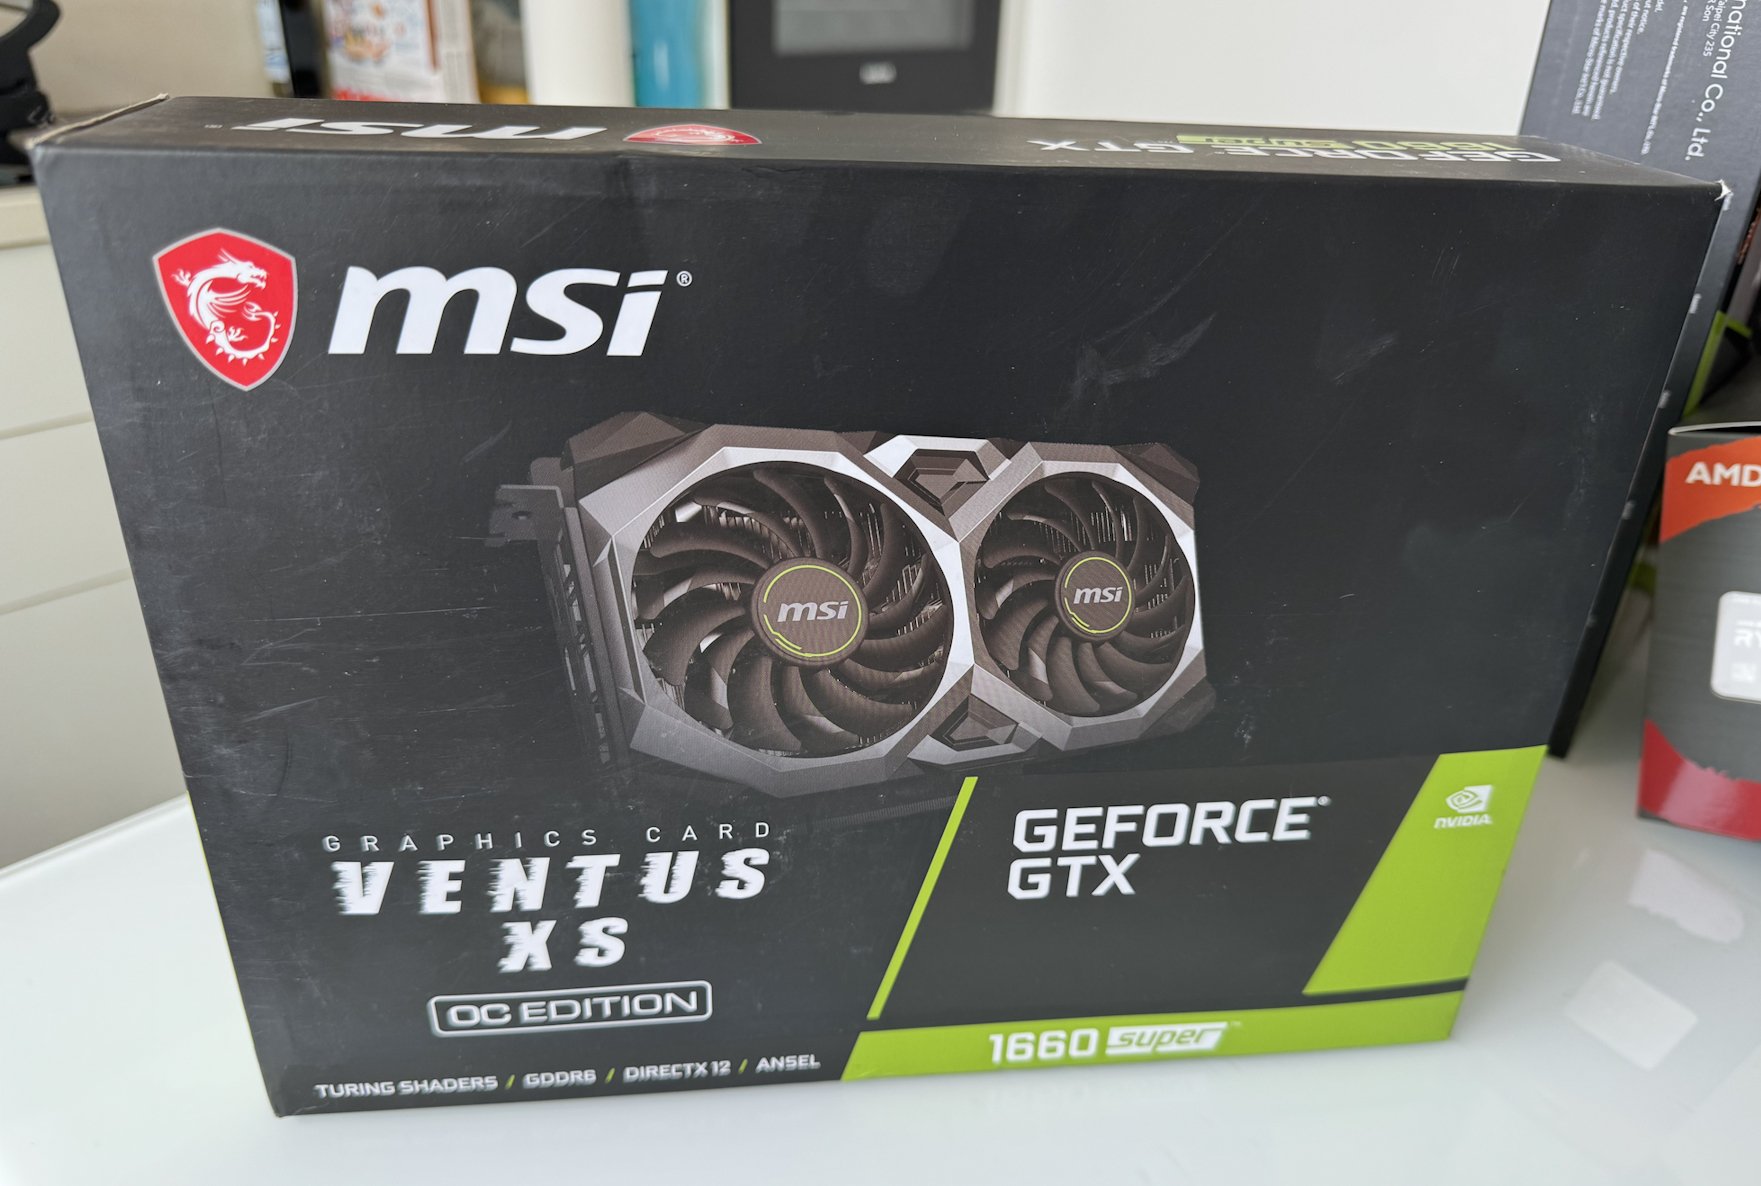 More information about "GeForce GTX 1660 Super - MSI Ventus XS (OC Edition)"